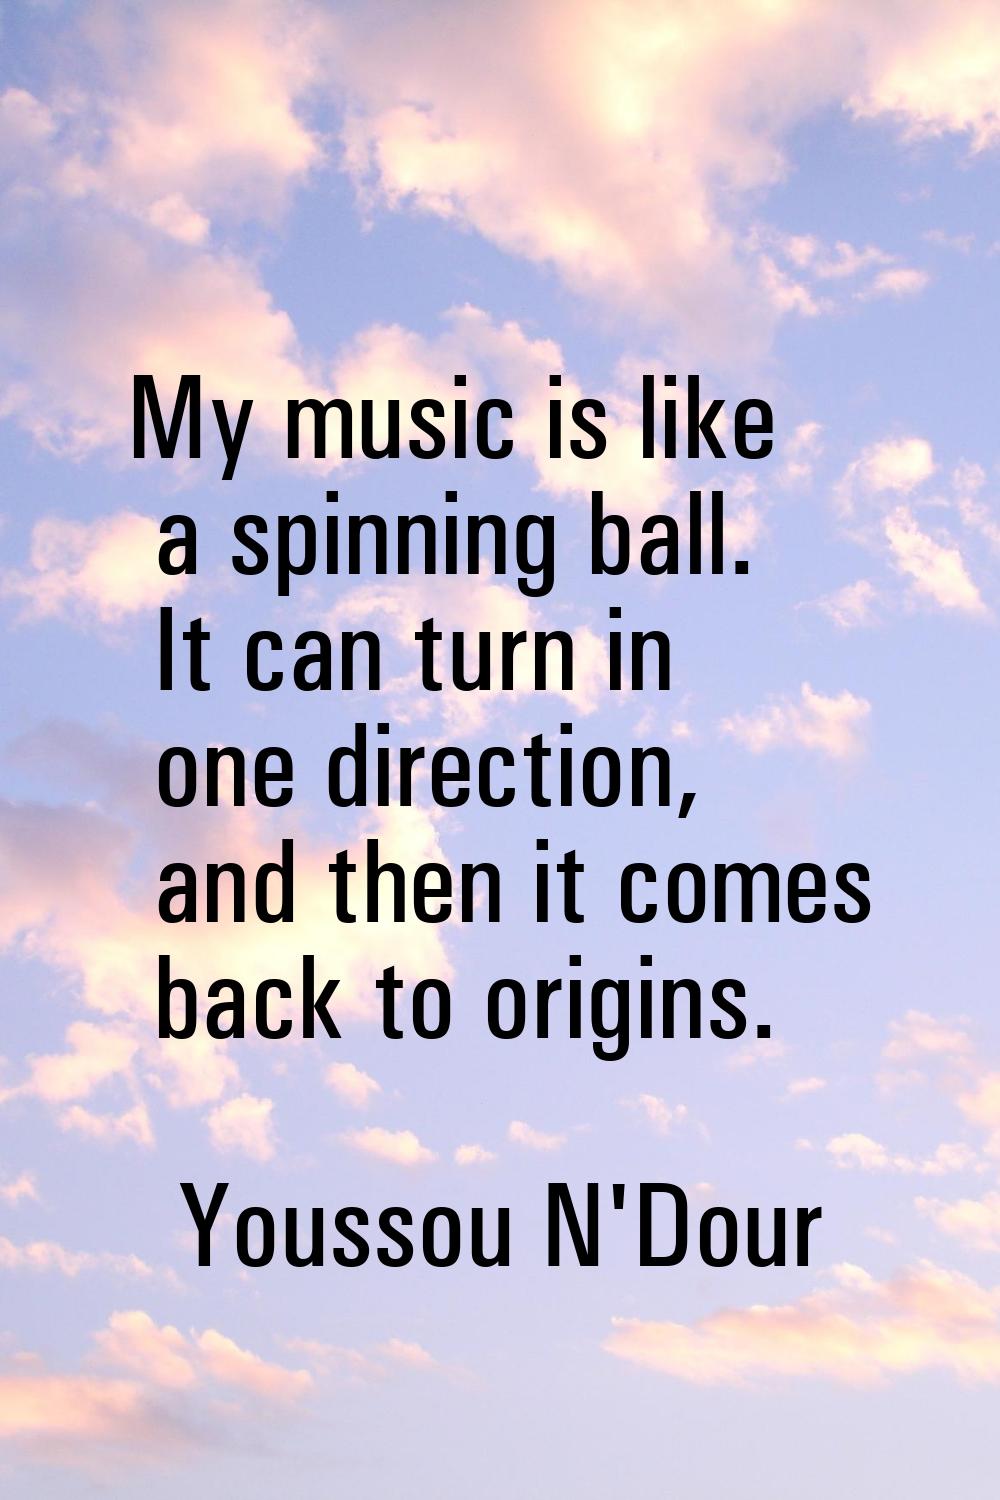 My music is like a spinning ball. It can turn in one direction, and then it comes back to origins.